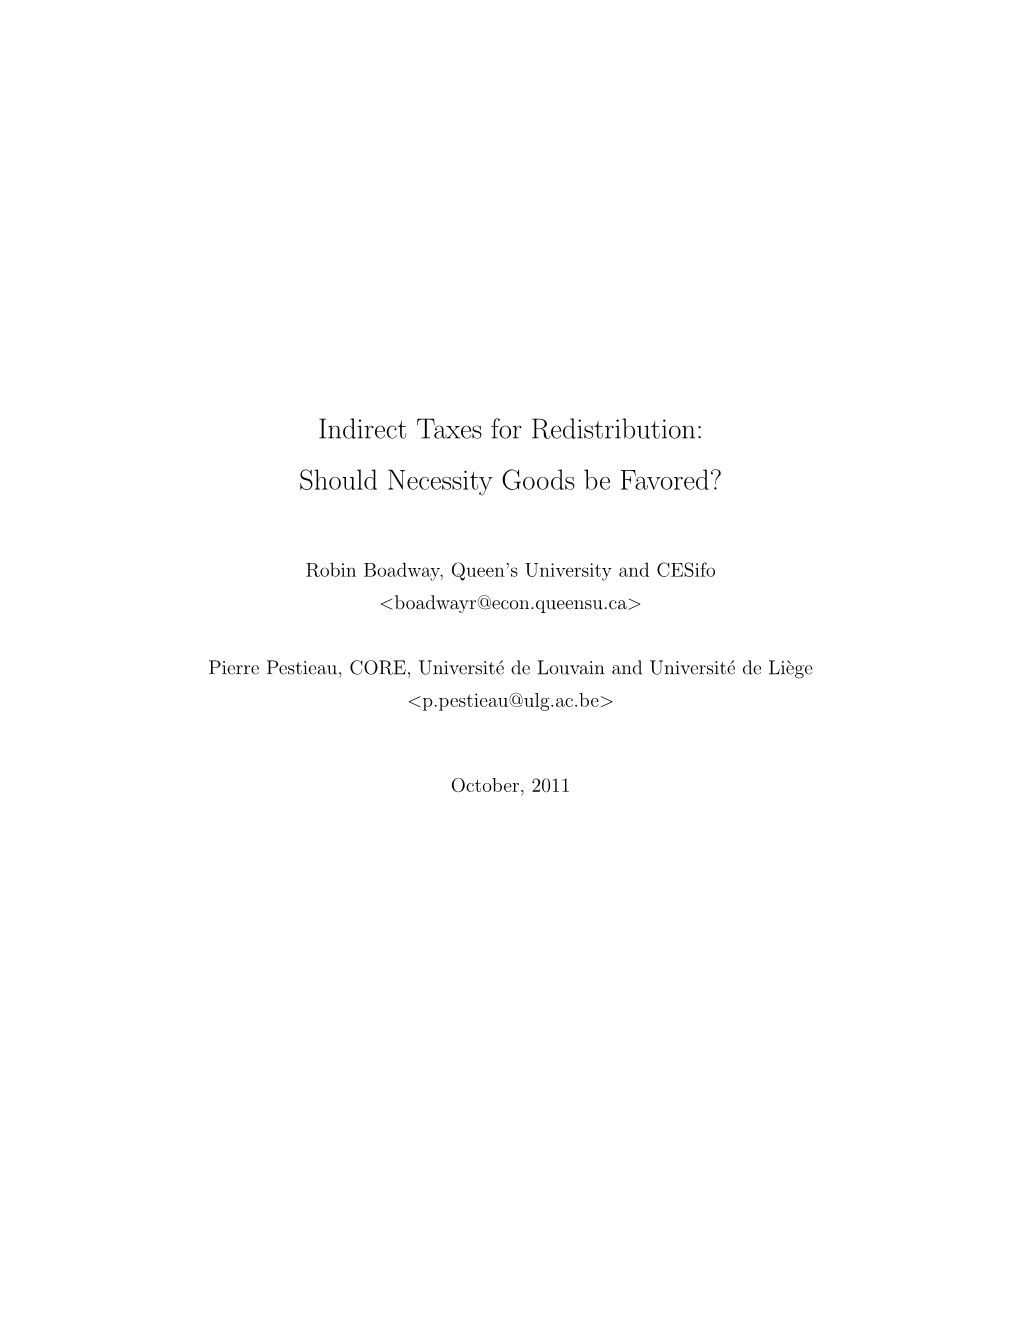 Indirect Taxes for Redistribution: Should Necessity Goods Be Favored?